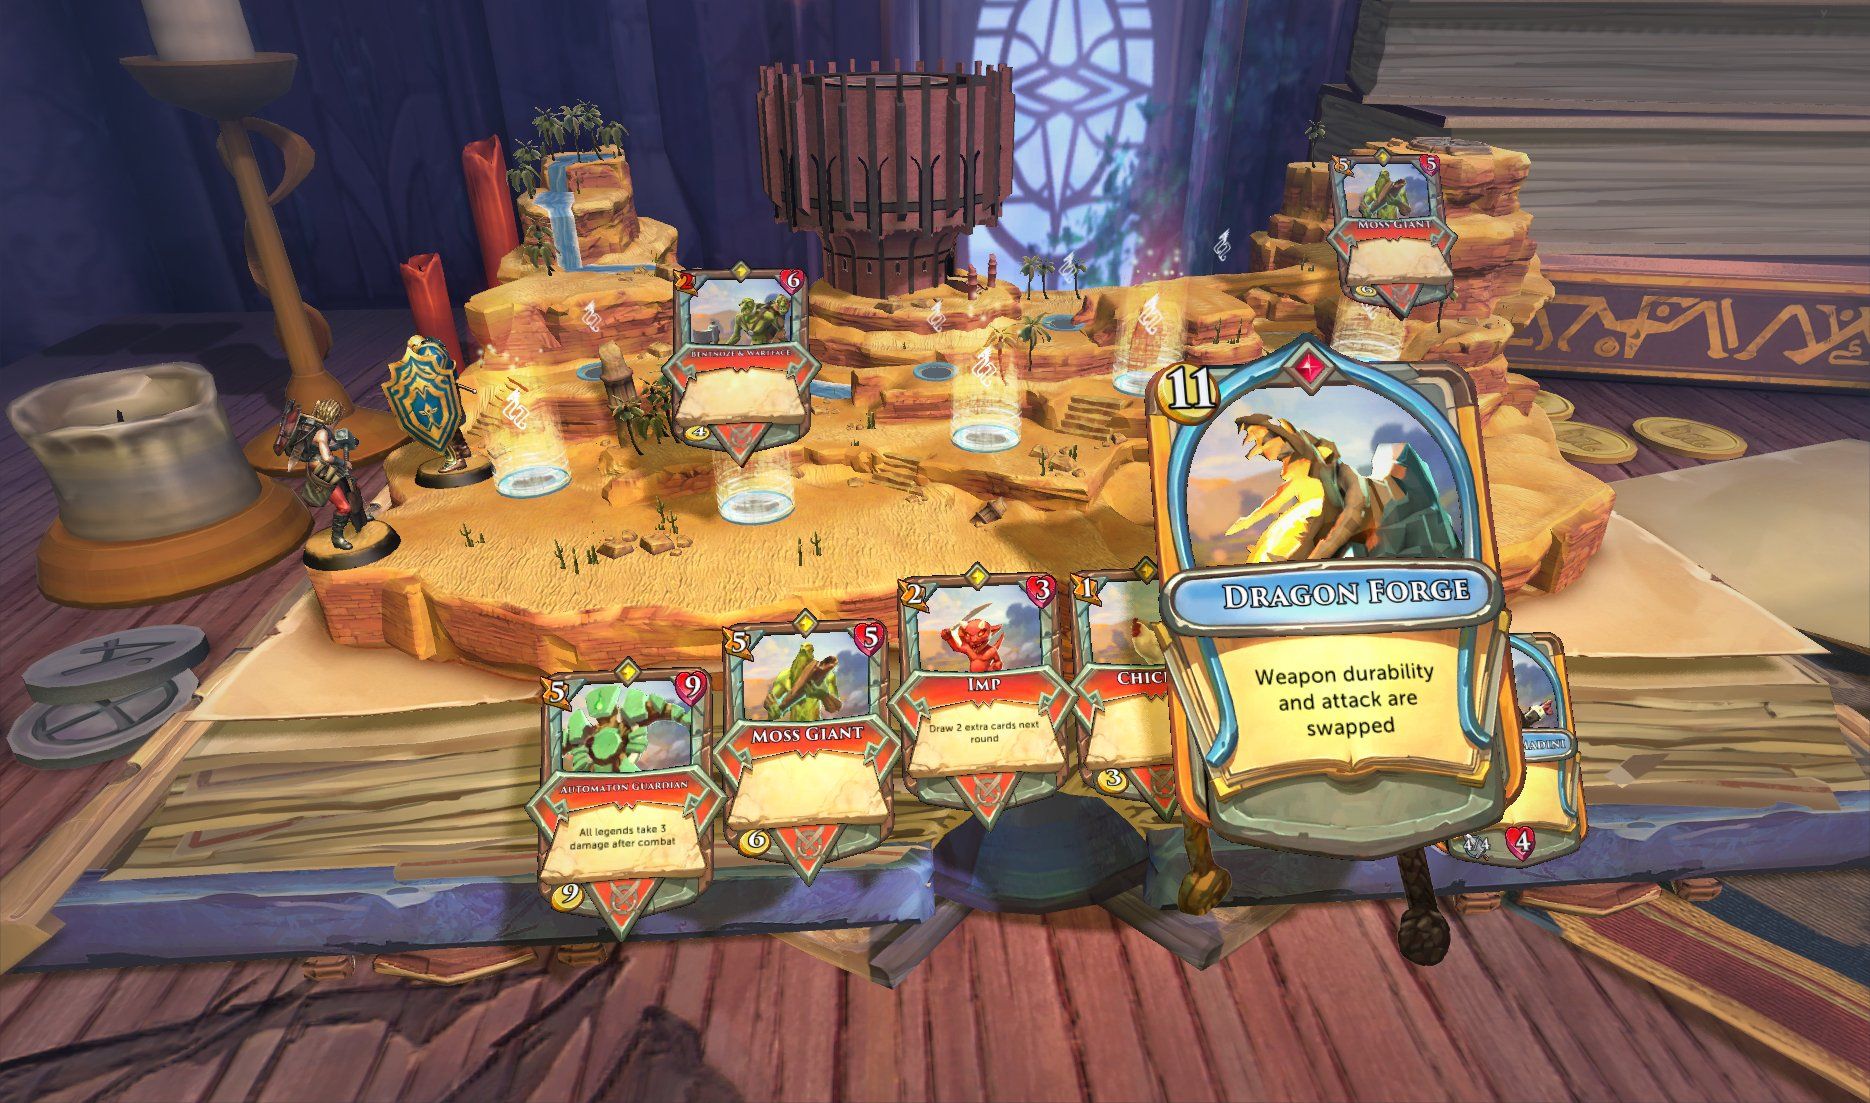 Chronicle: Runescape Legends card game